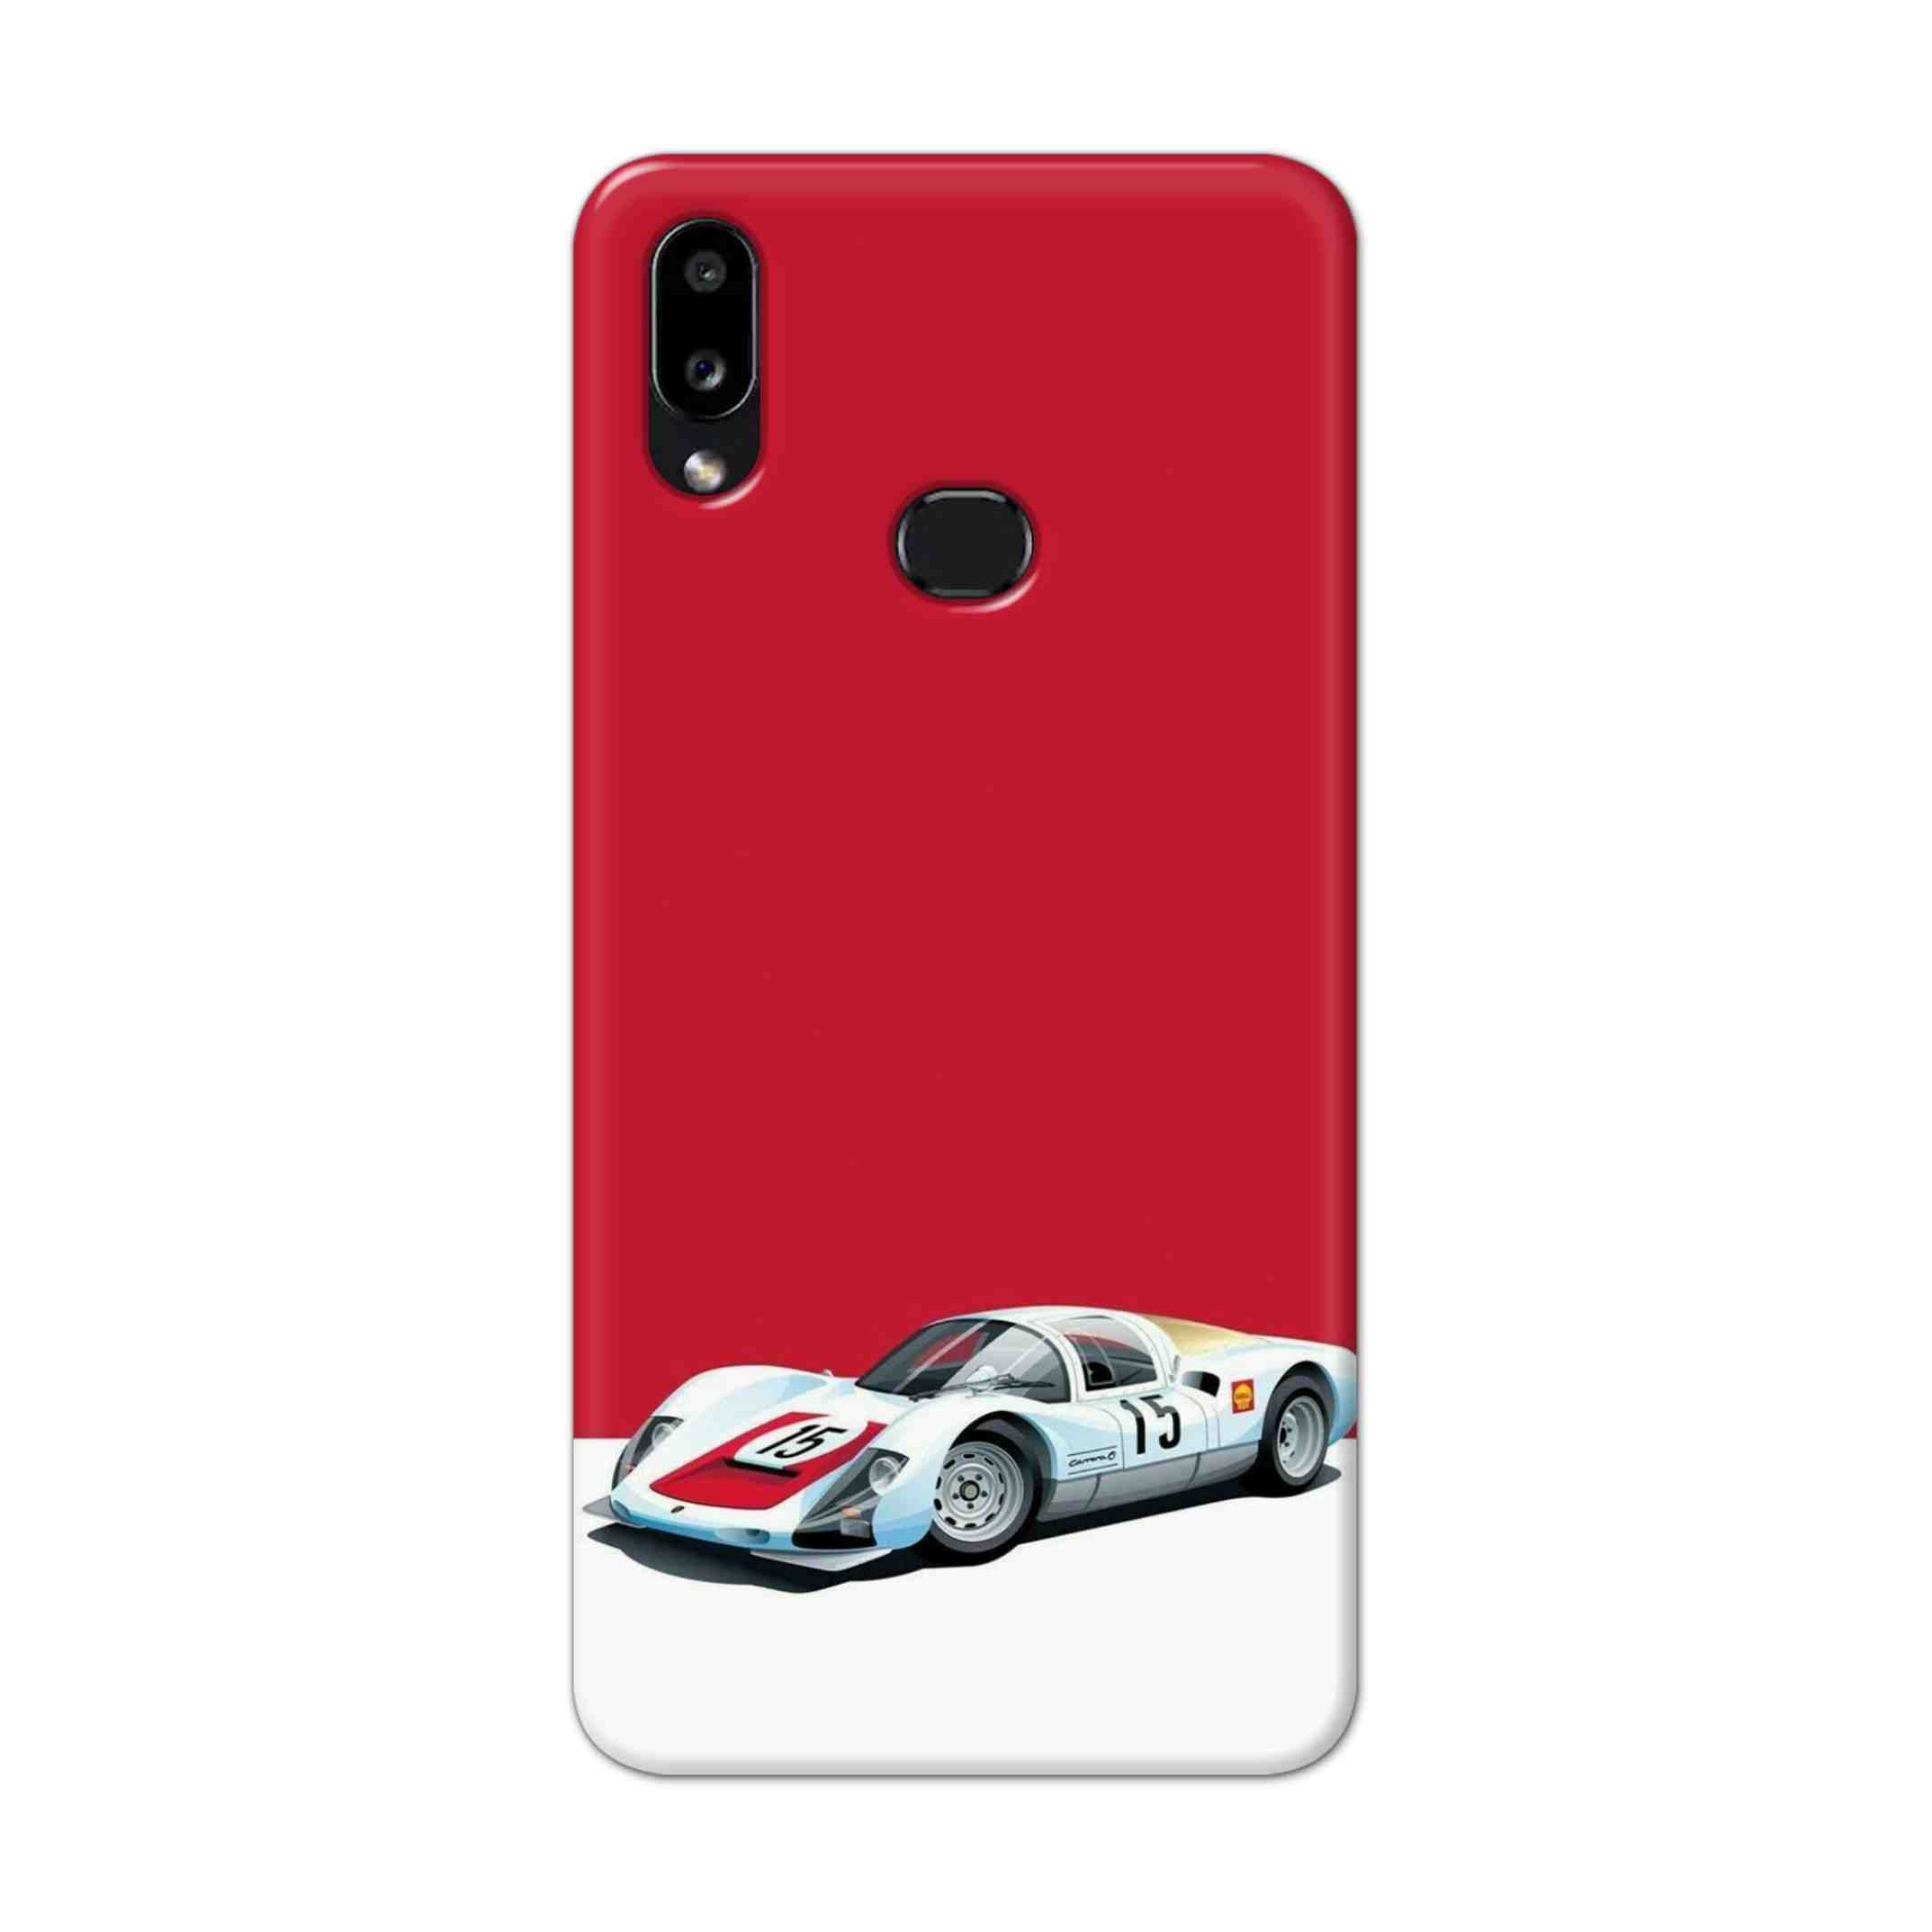 Buy Ferrari F15 Hard Back Mobile Phone Case Cover For Samsung Galaxy M01s Online